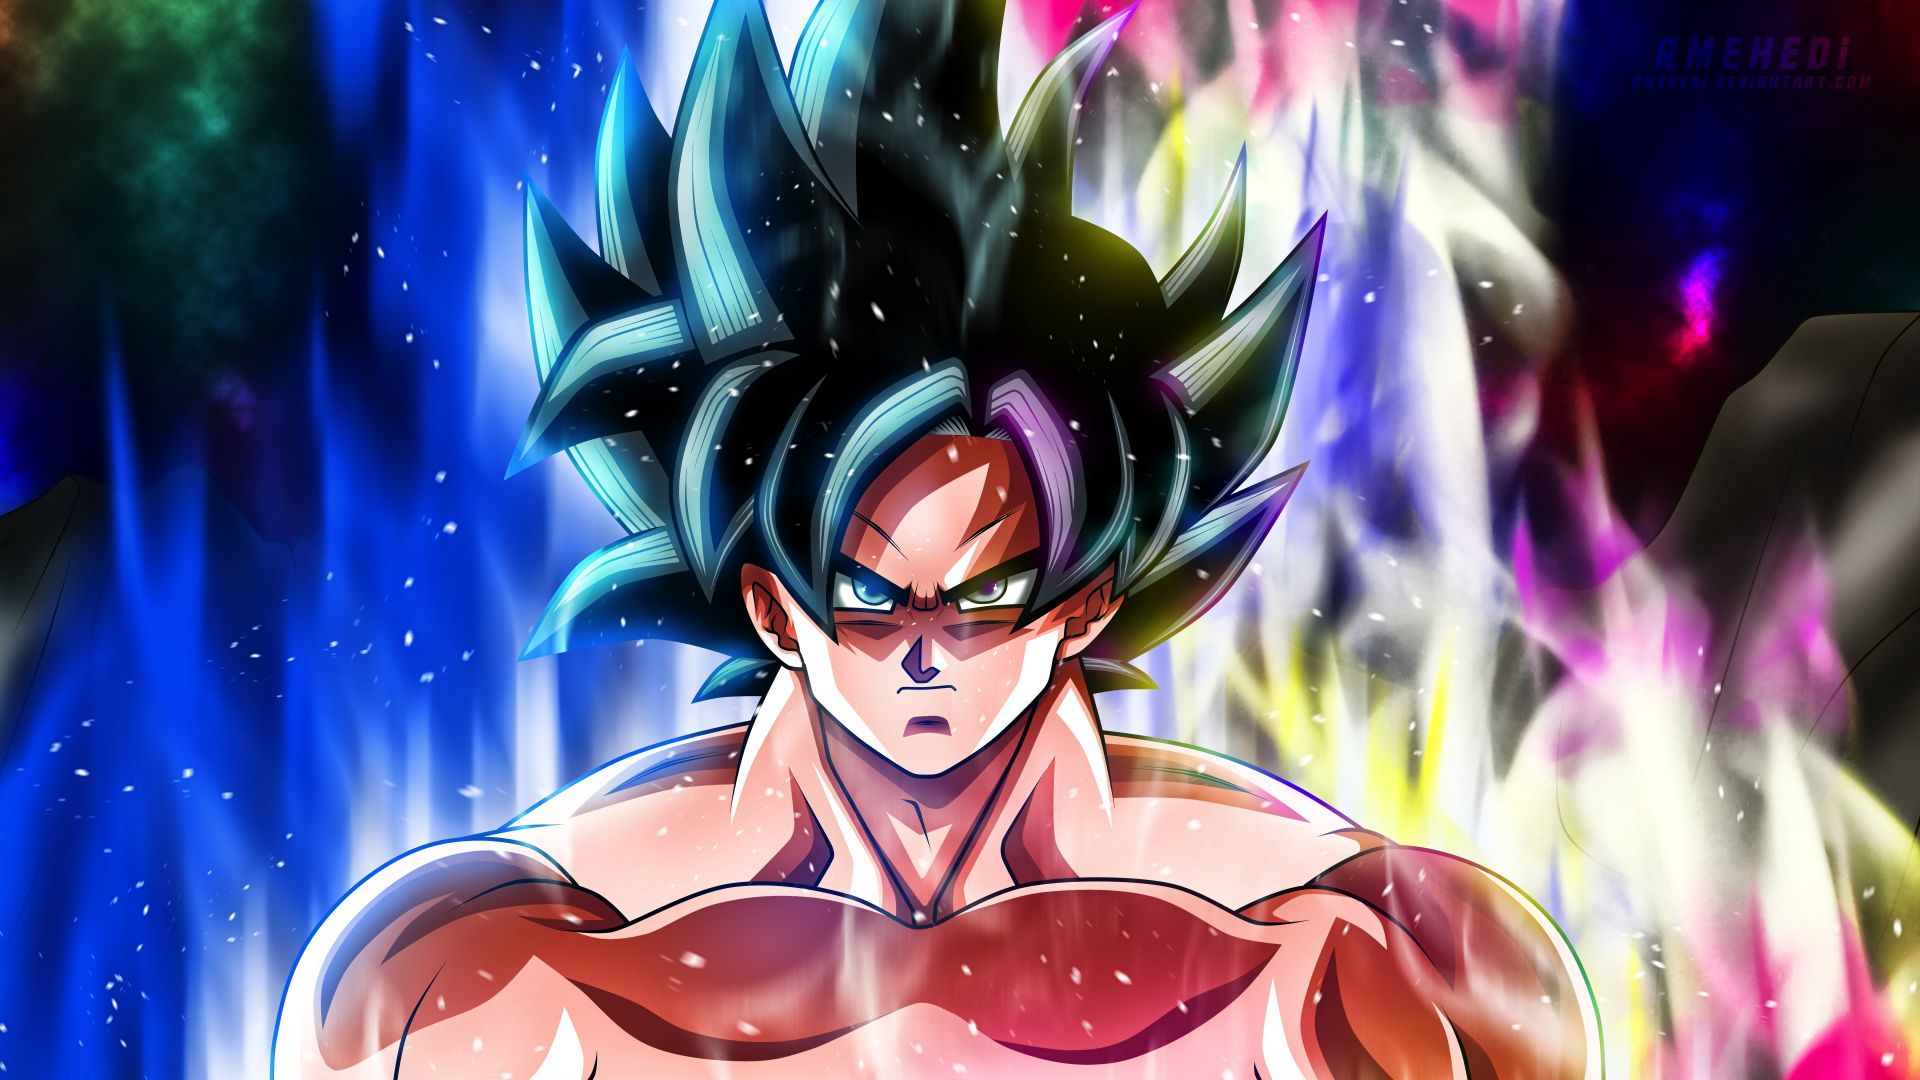 Desktop Wallpaper Angry Goku, Anime, Dragon Ball Super, HD Image, Picture, Background, 05197a